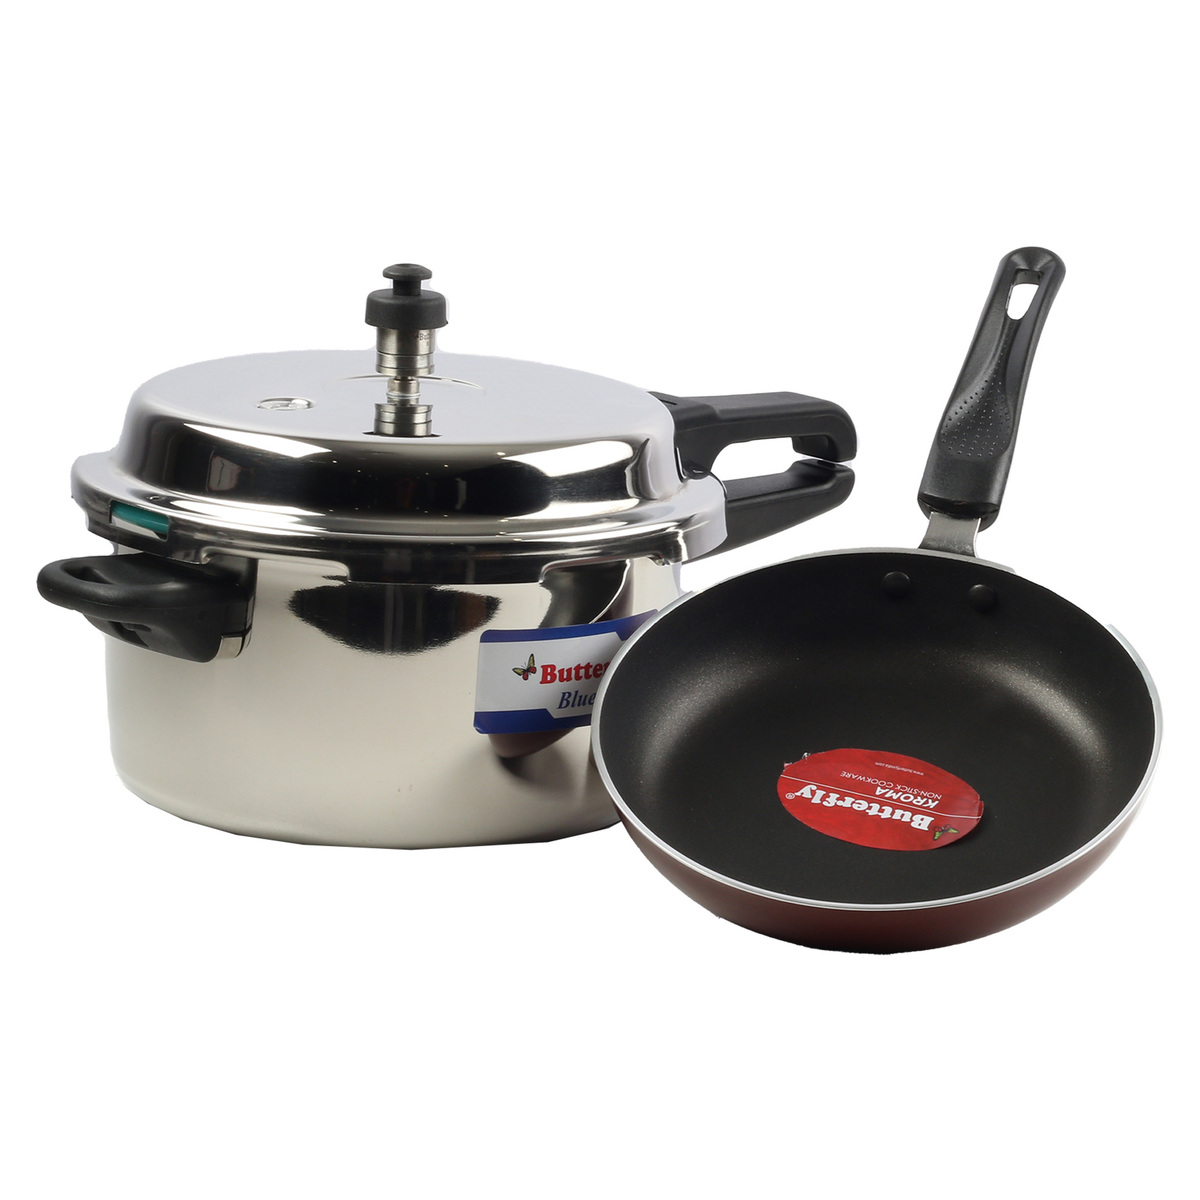 Butterfly Stainless Steel Pressure Cooker 5Ltr + Fry Pan 20cm